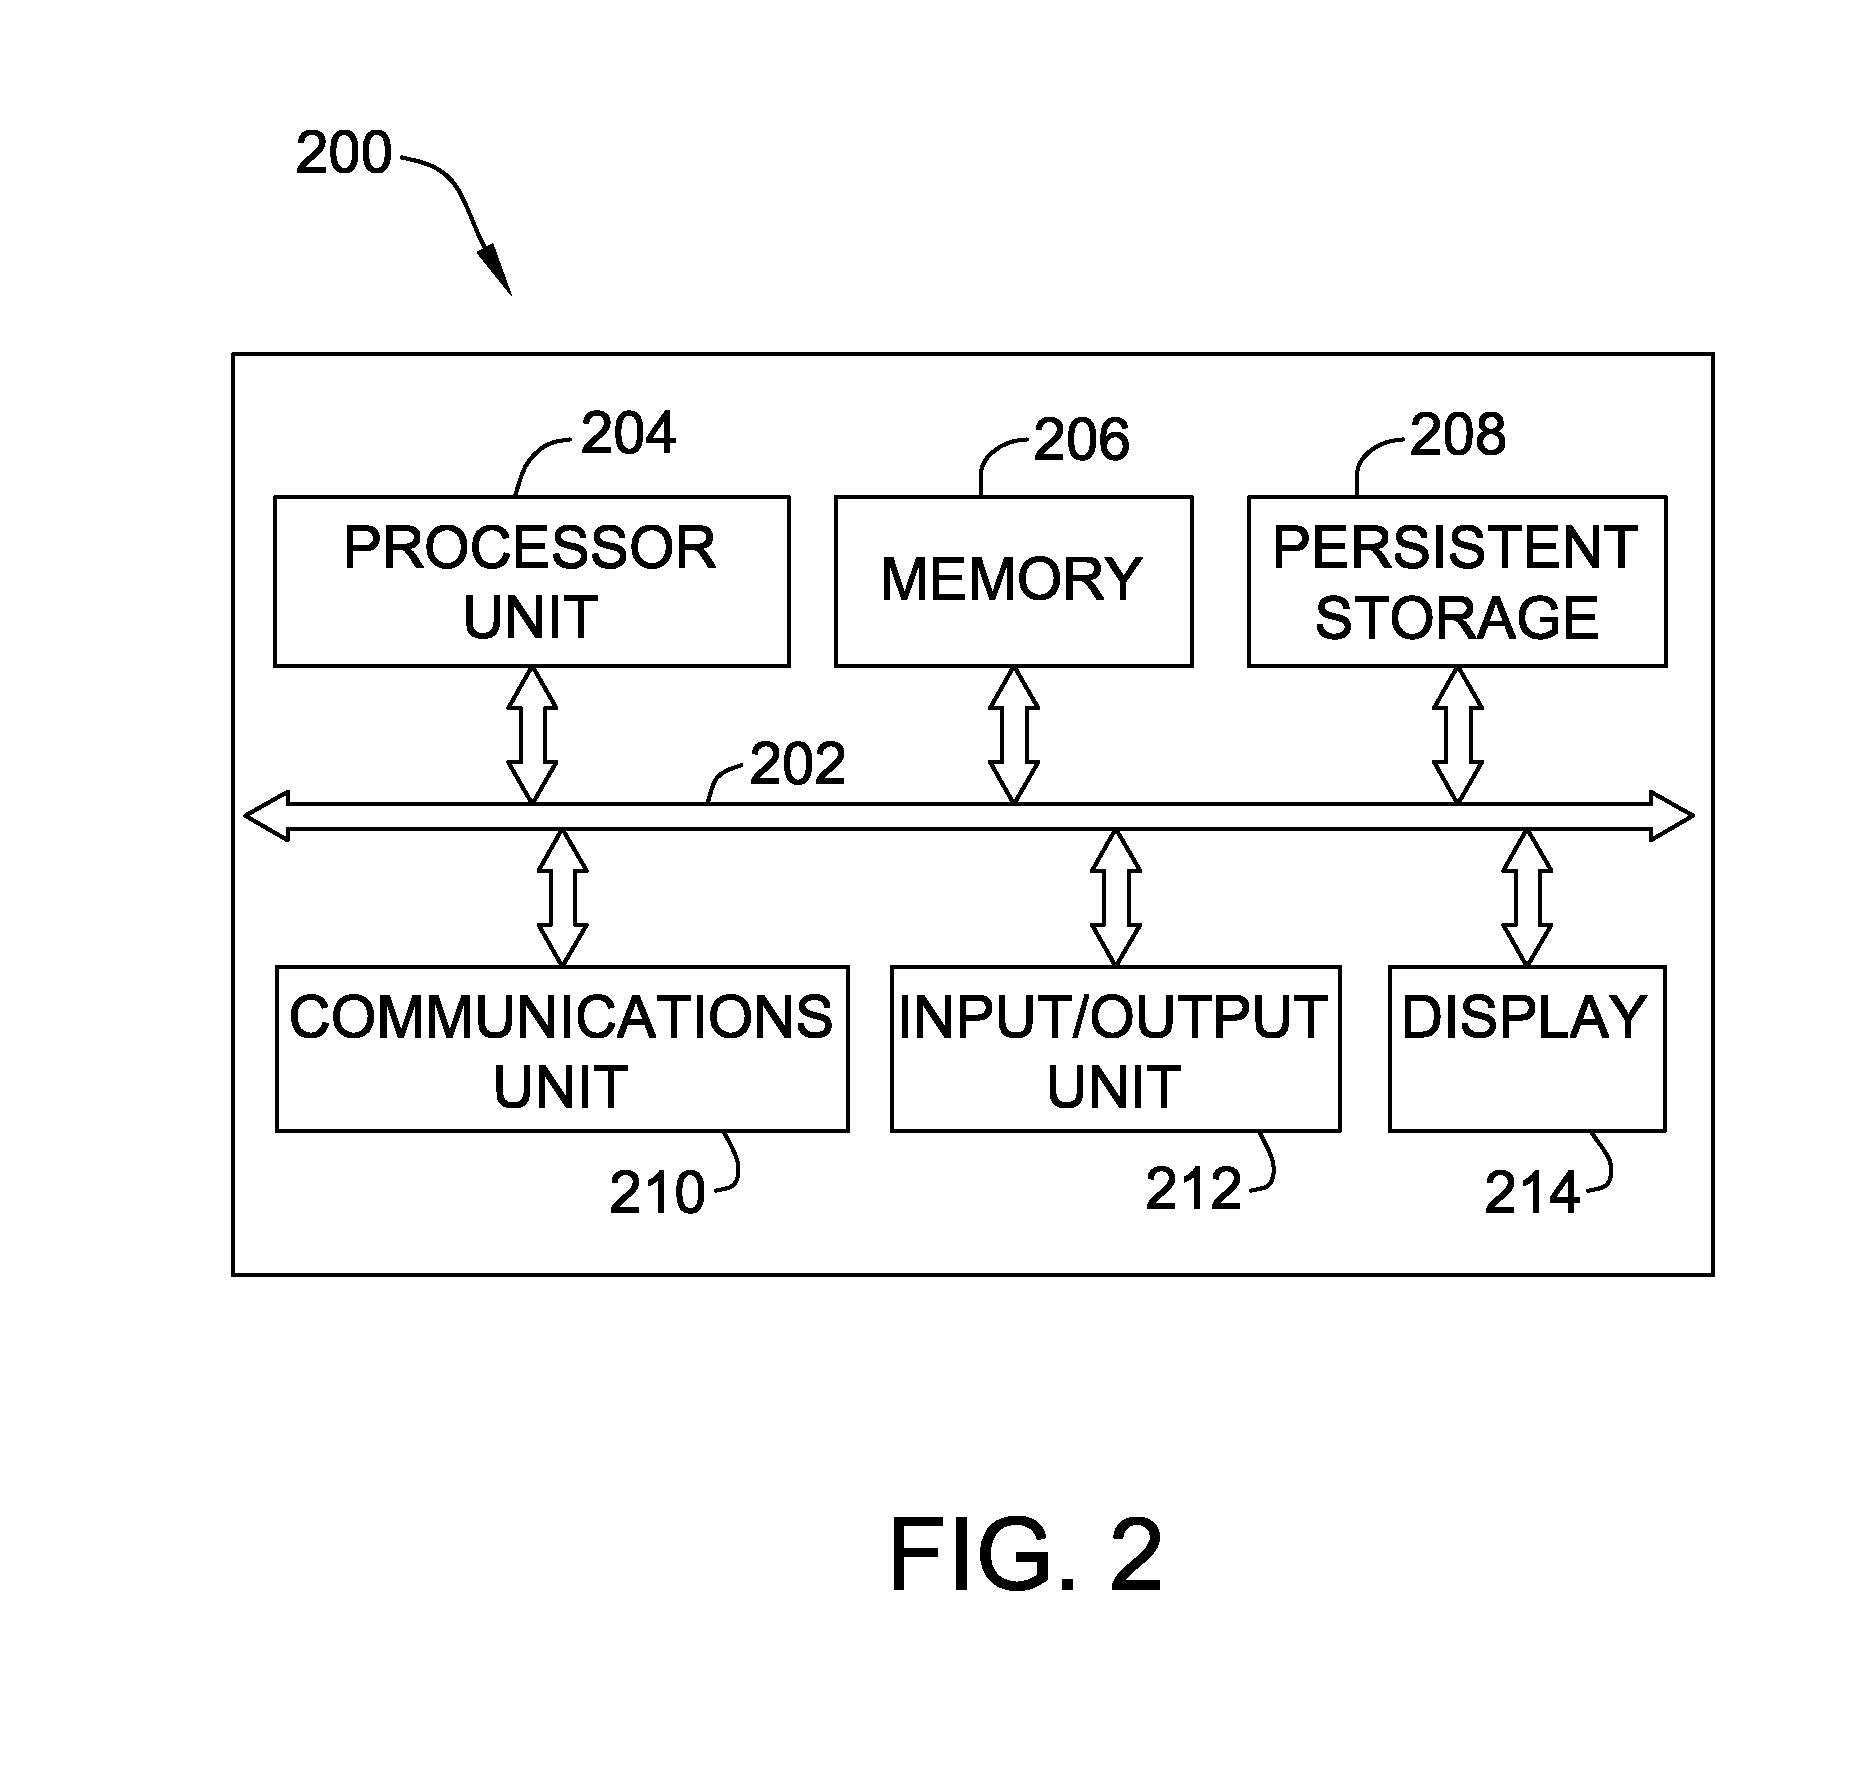 Methods and systems for aircraft data communications over heterogeneous connectivity